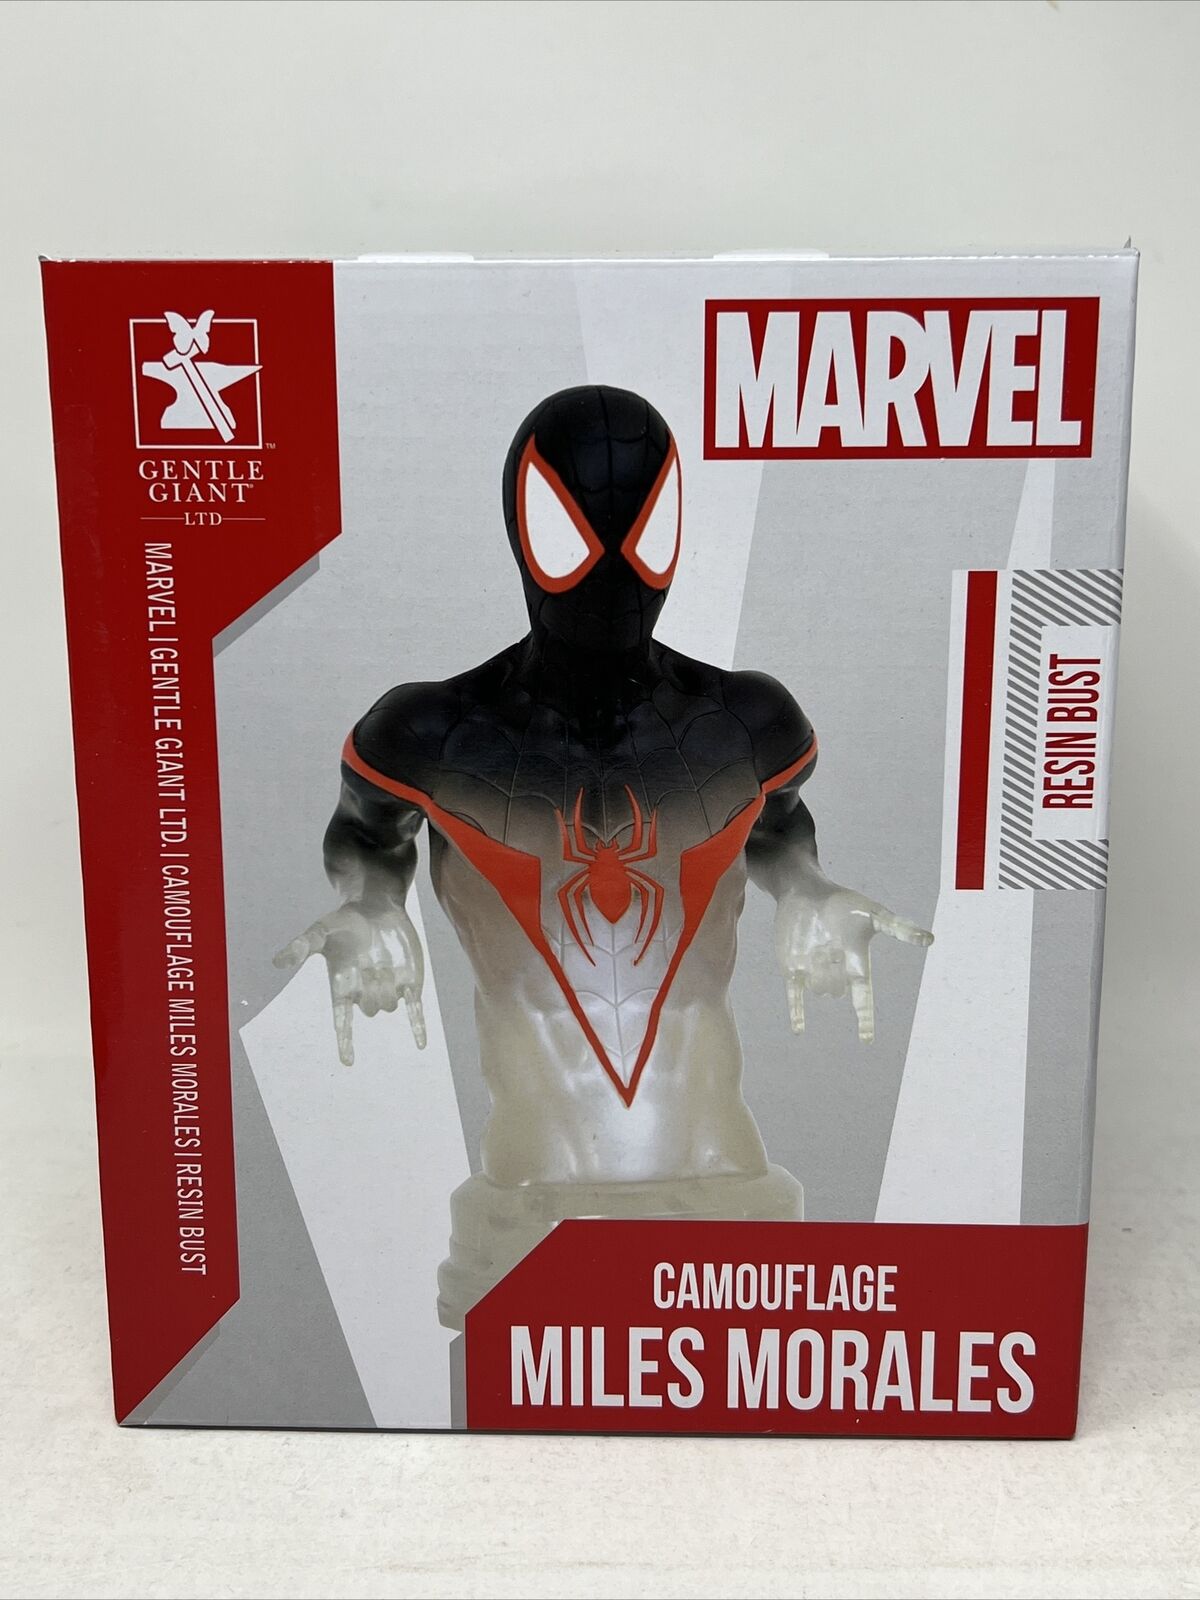 Gentle Giant Camouflage Miles Morales Resin Bust Spiderman 750 PC Count SDCC